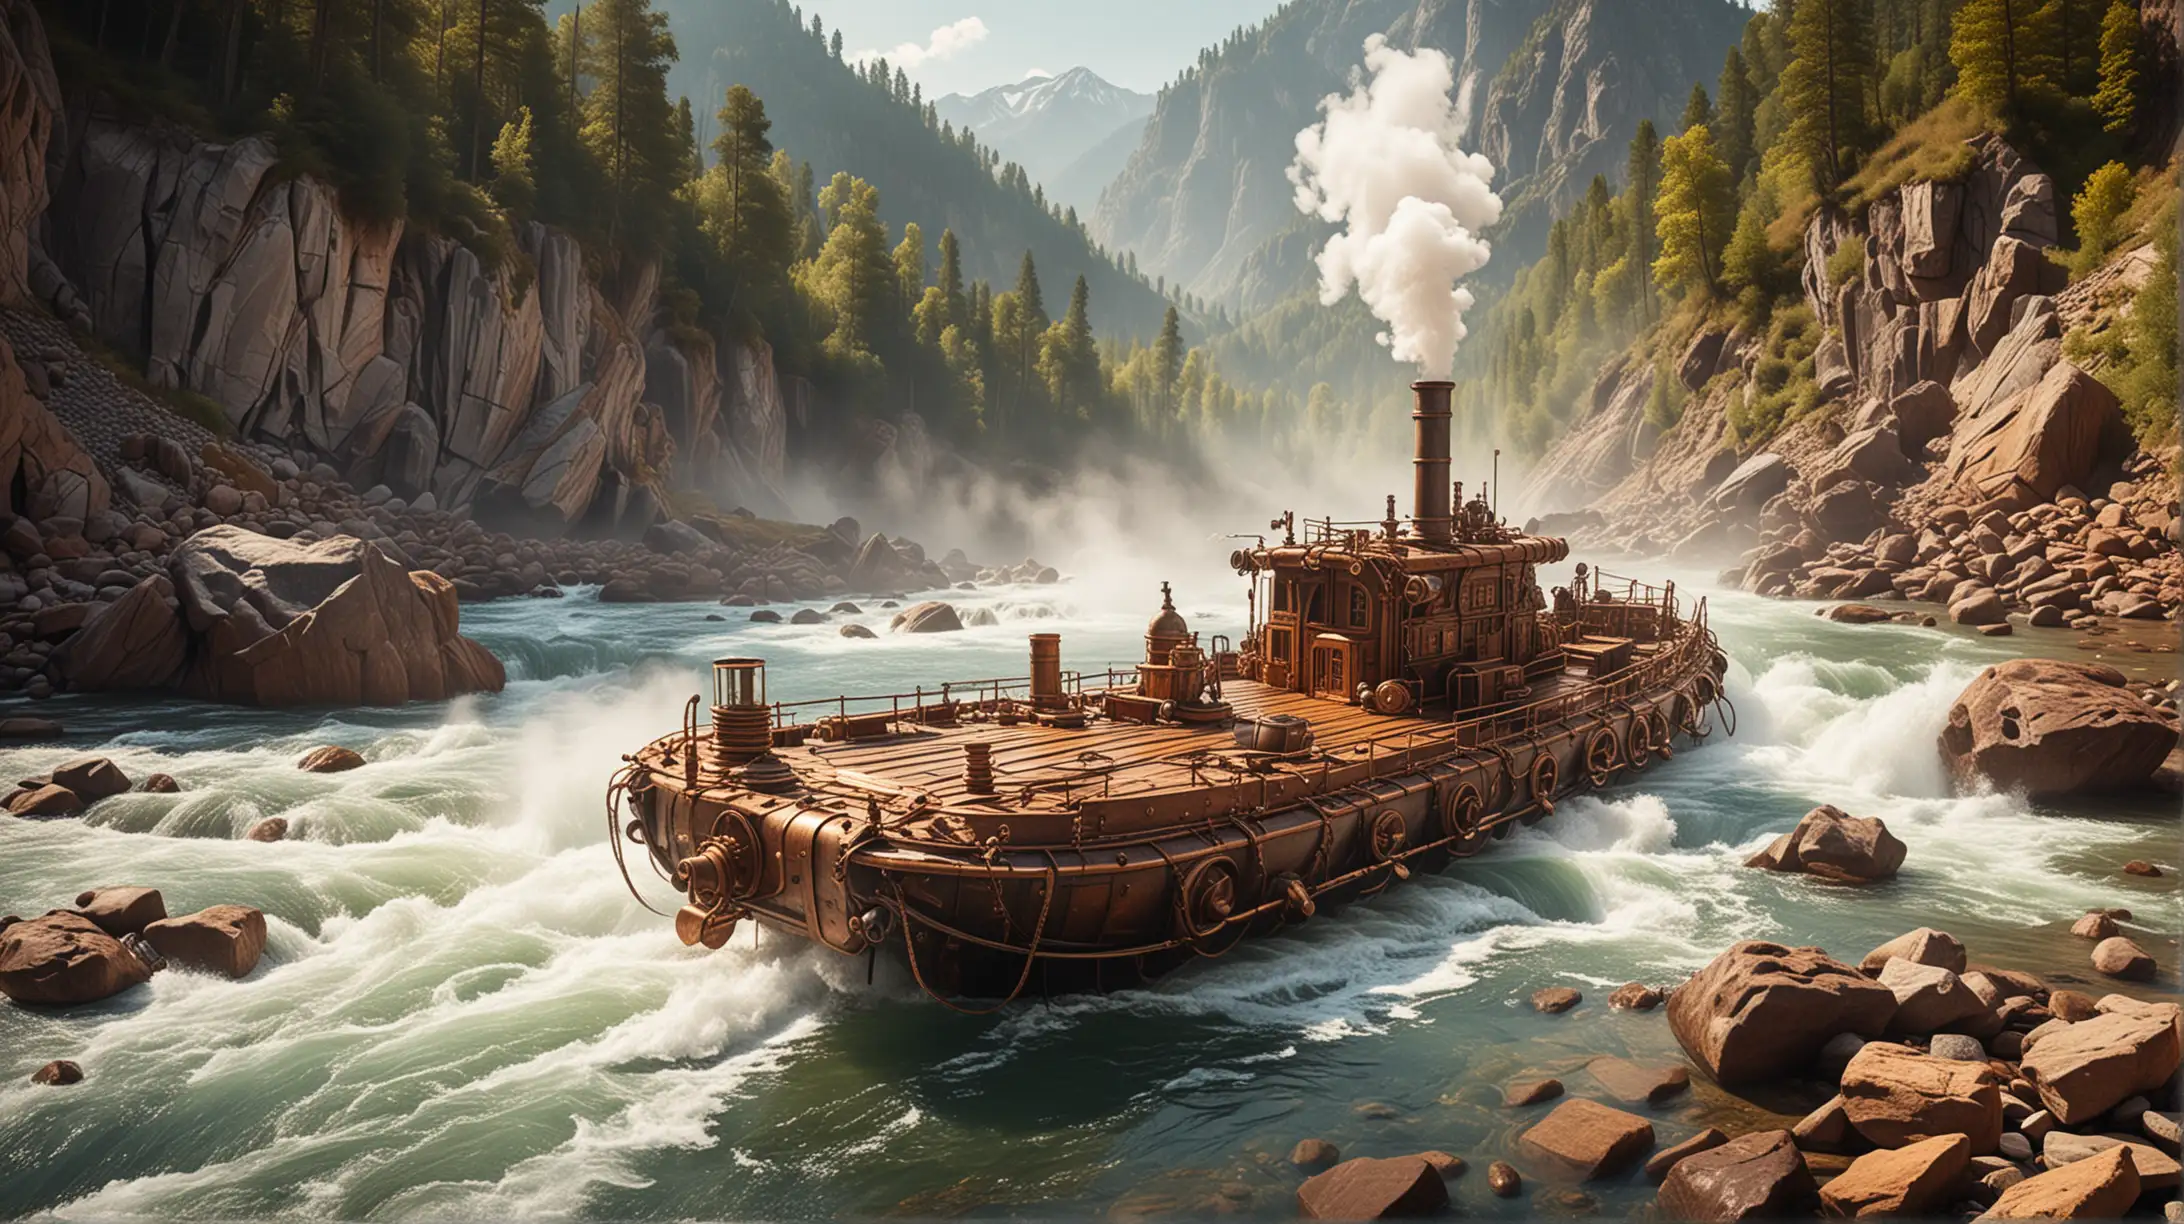 a steampunk raft made of wood and copper flows on a mountain river with wild shores and many stones in the river, some steam and smoke, sunny and hot